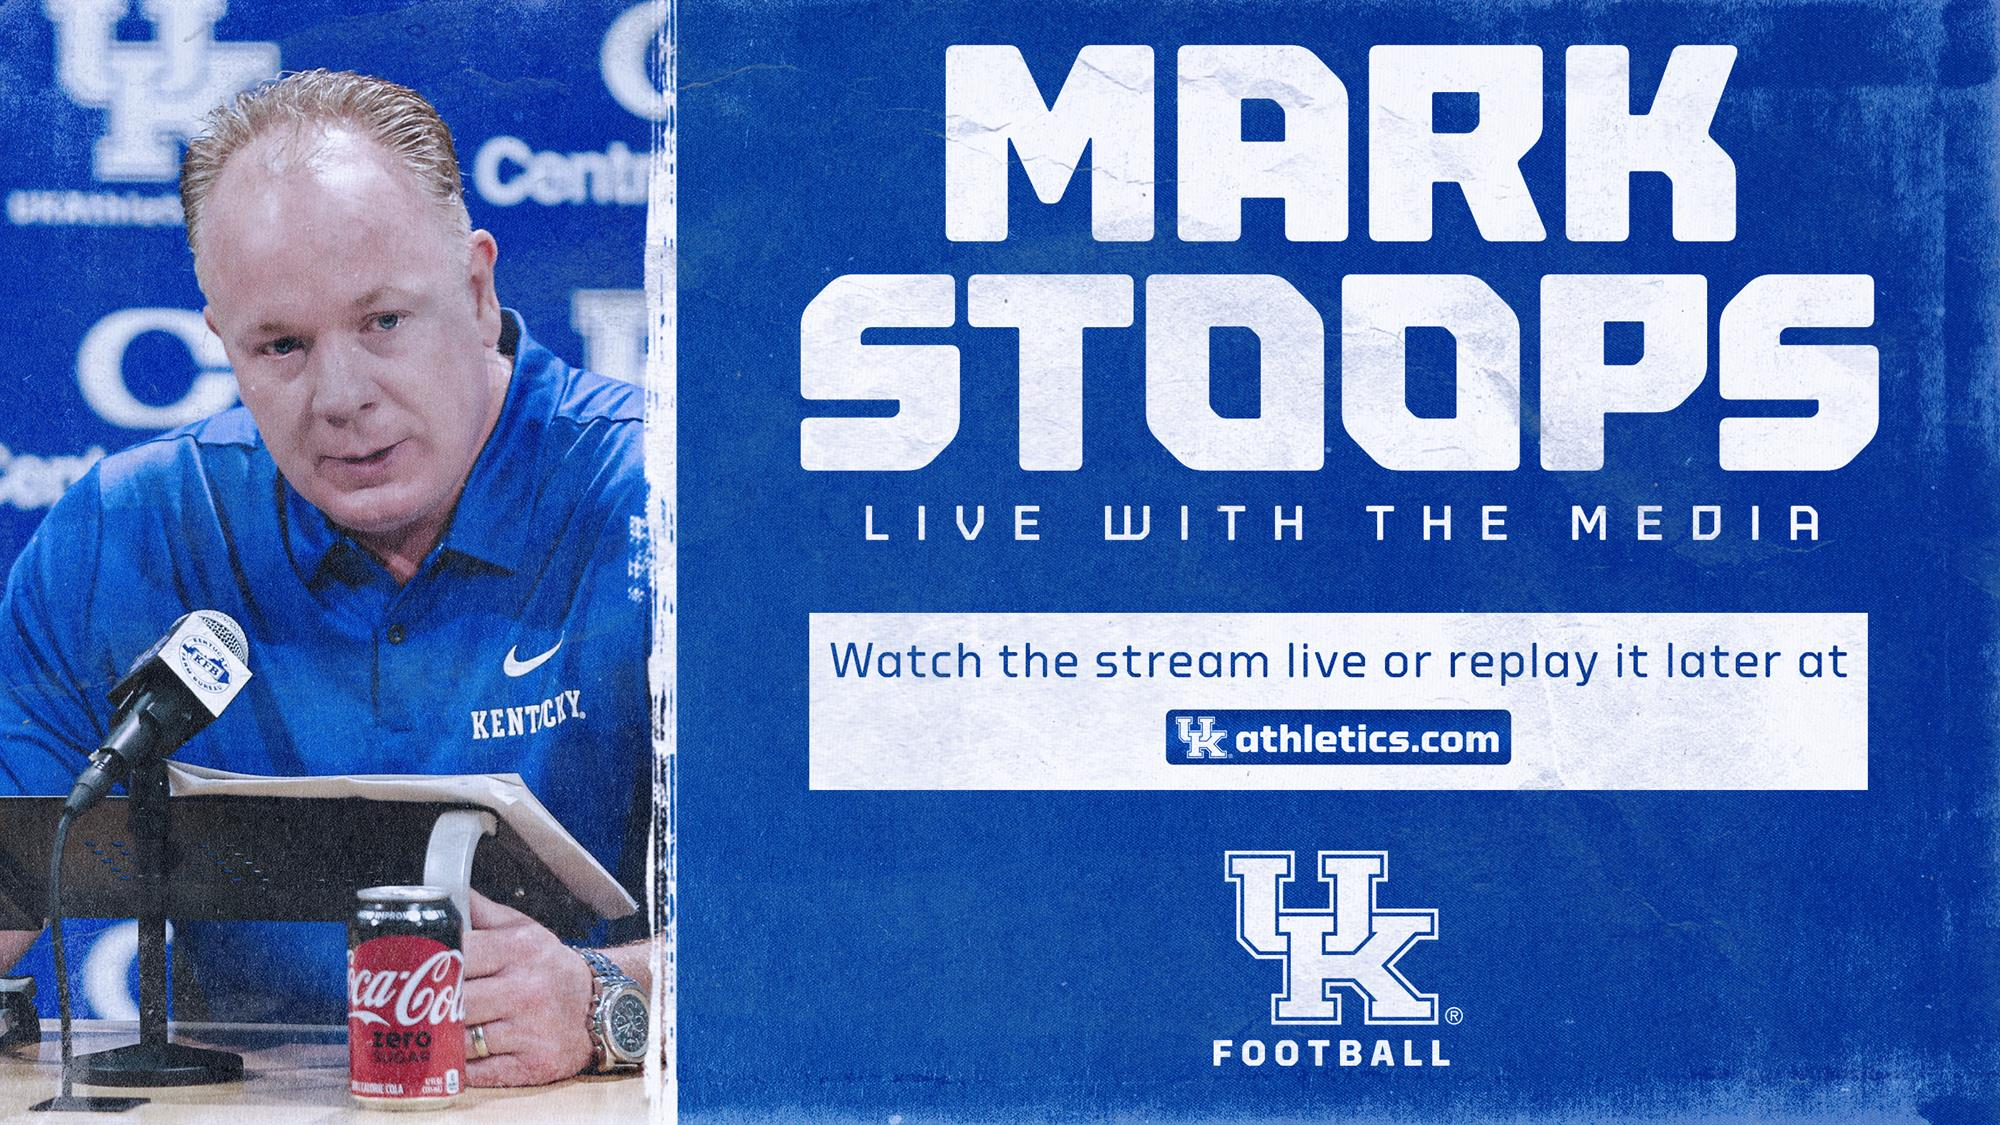 Mark Stoops Press Conference